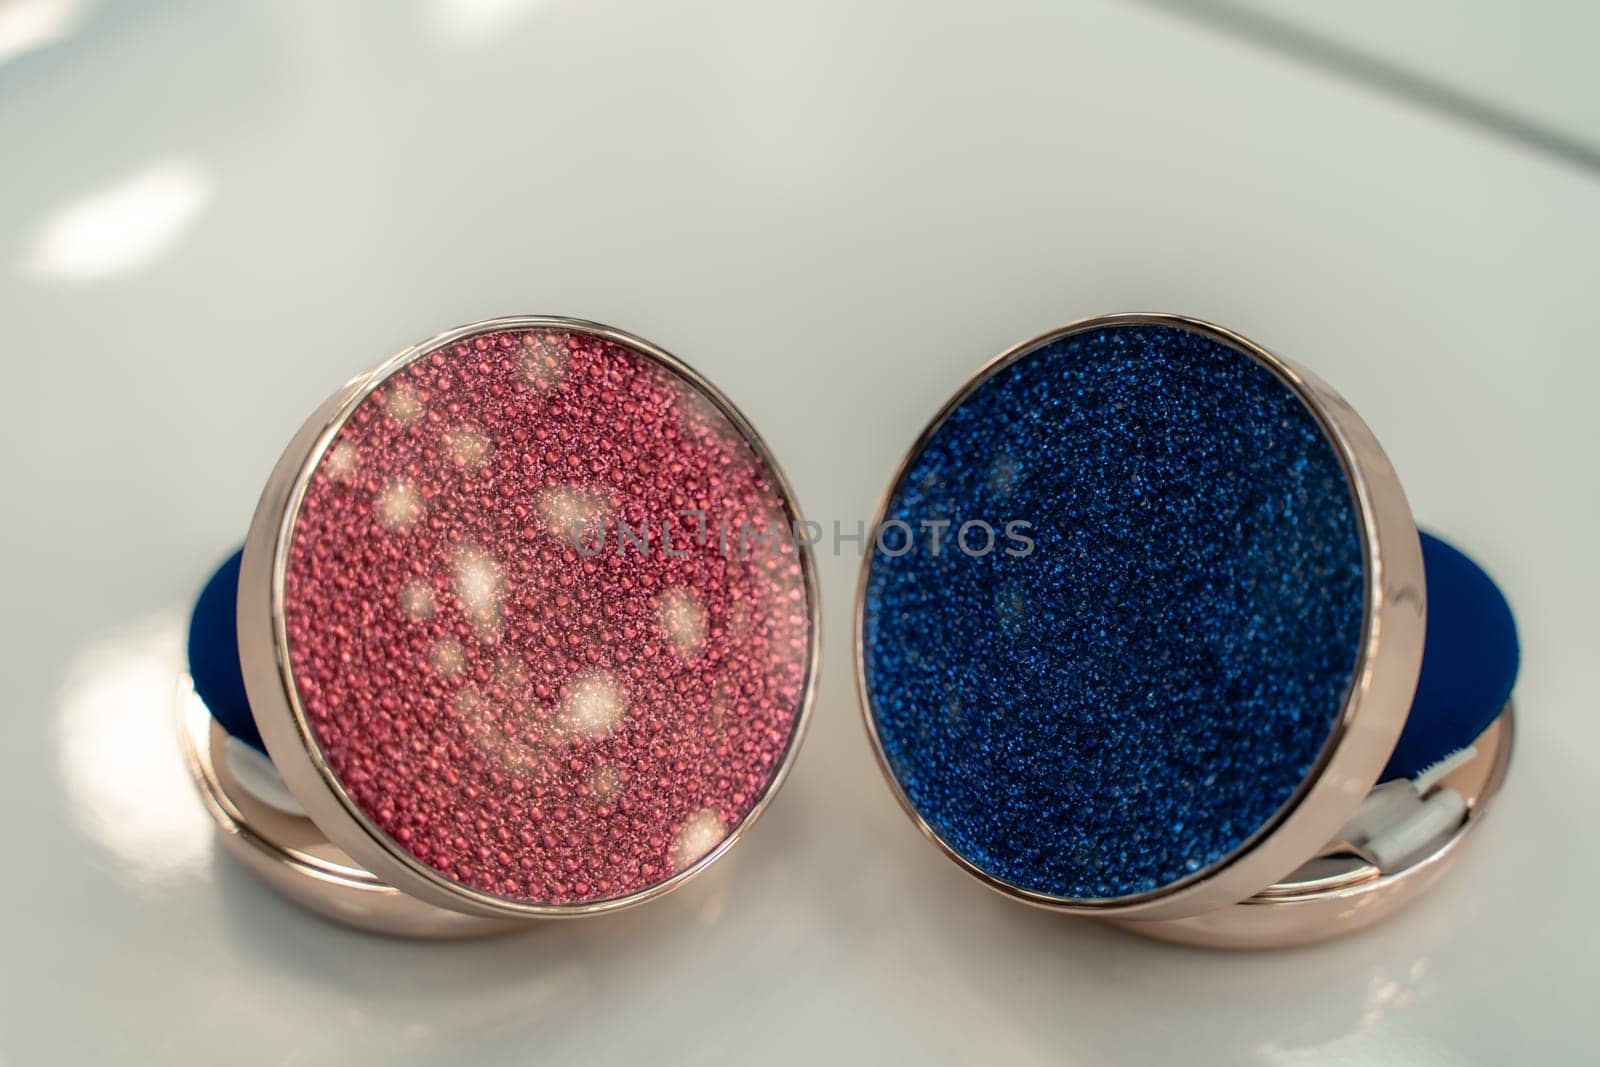 Two small round makeup compacts with glittery blue and pink designs. The compacts are placed next to each other on a white surface. by Matiunina